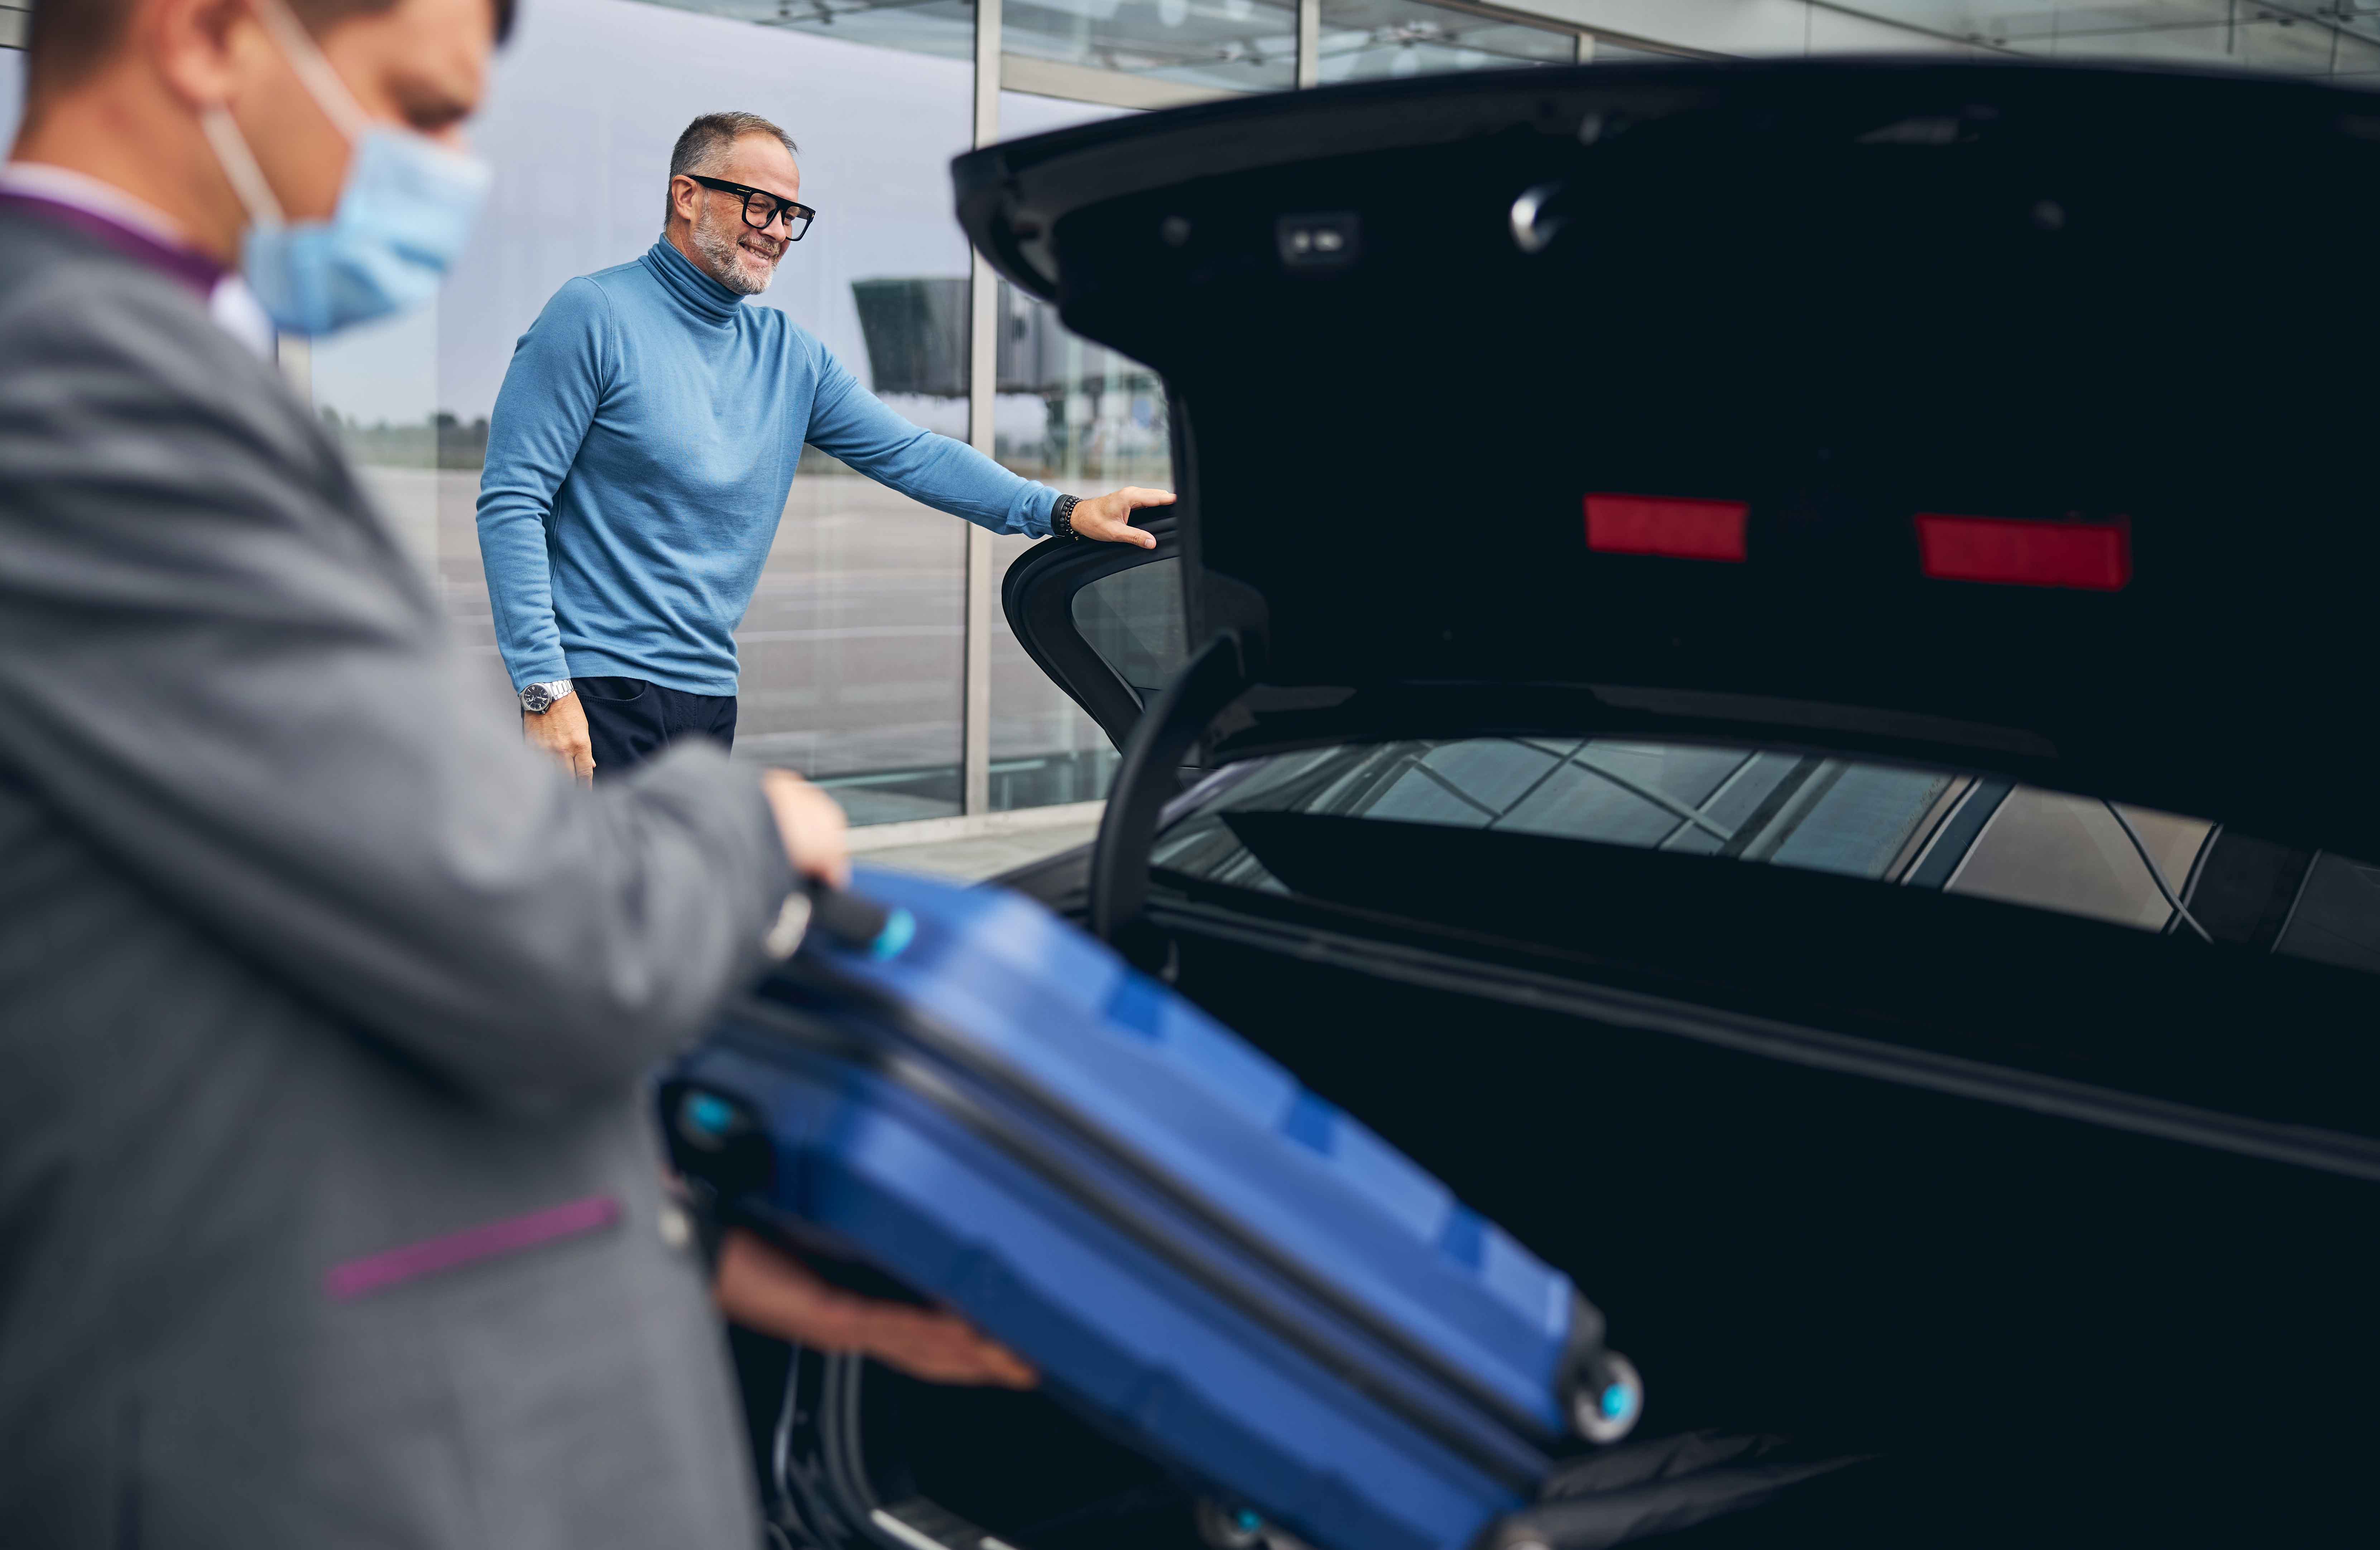 FREE Return VIP Chauffeur Transfers to Your Airport